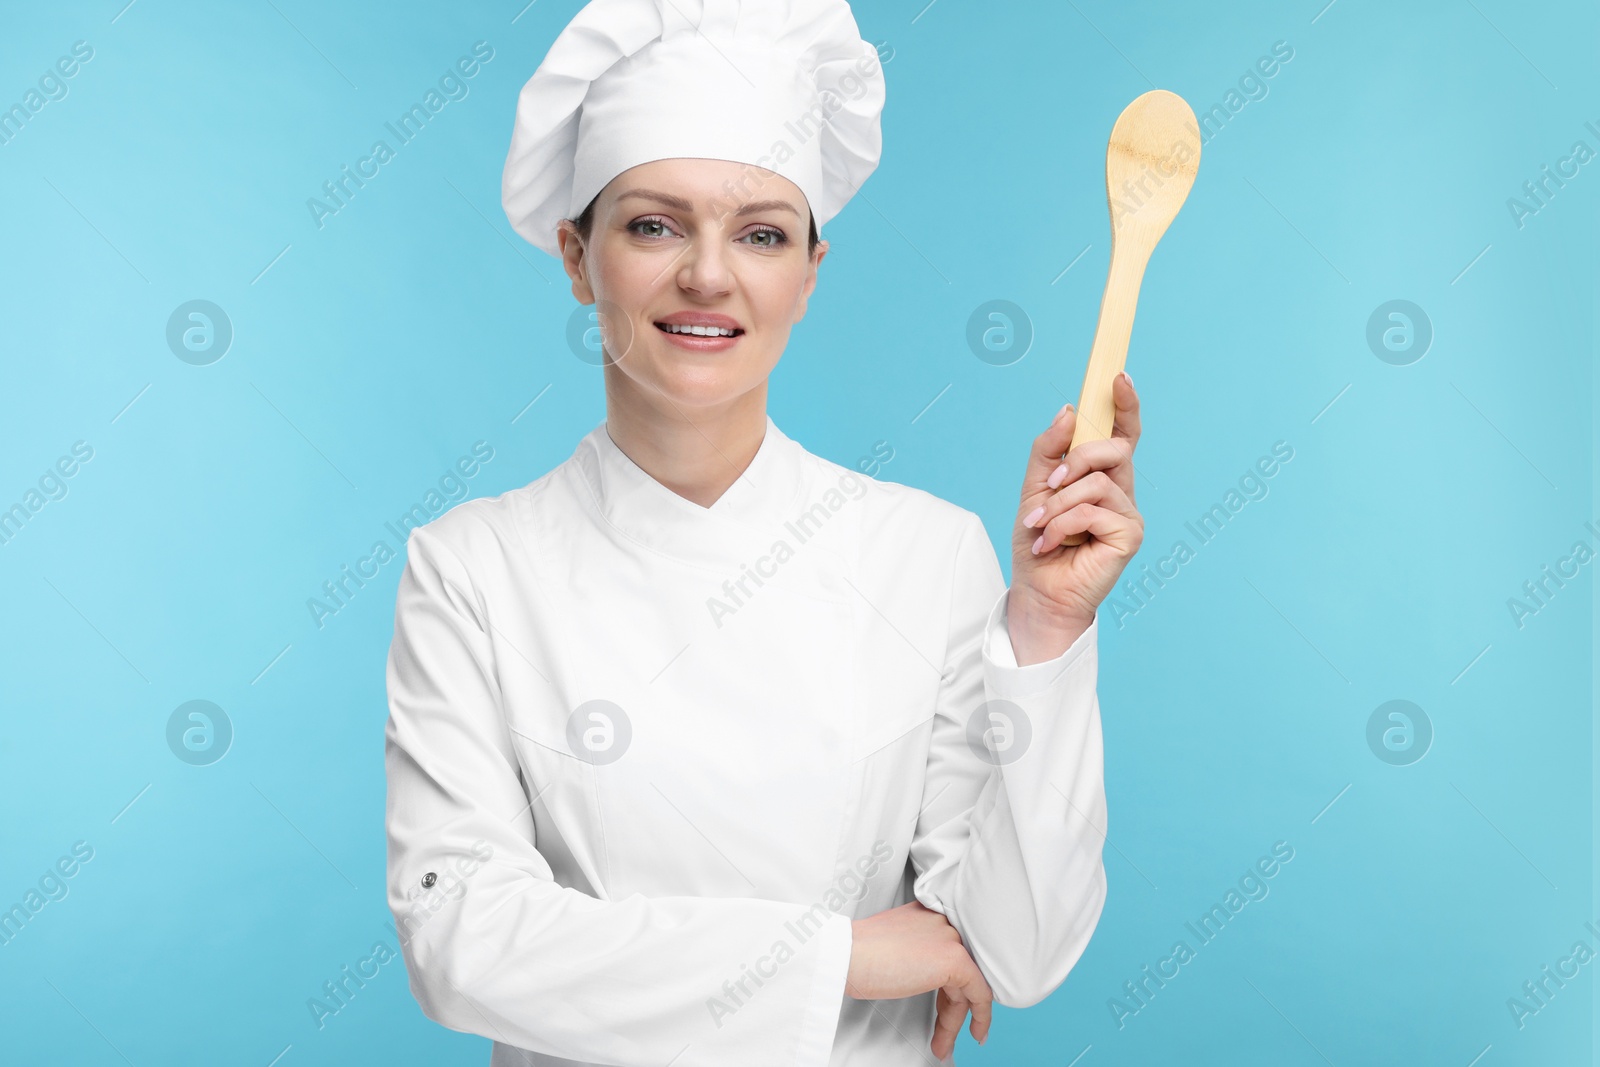 Photo of Happy woman chef in uniform holding wooden spoon on light blue background